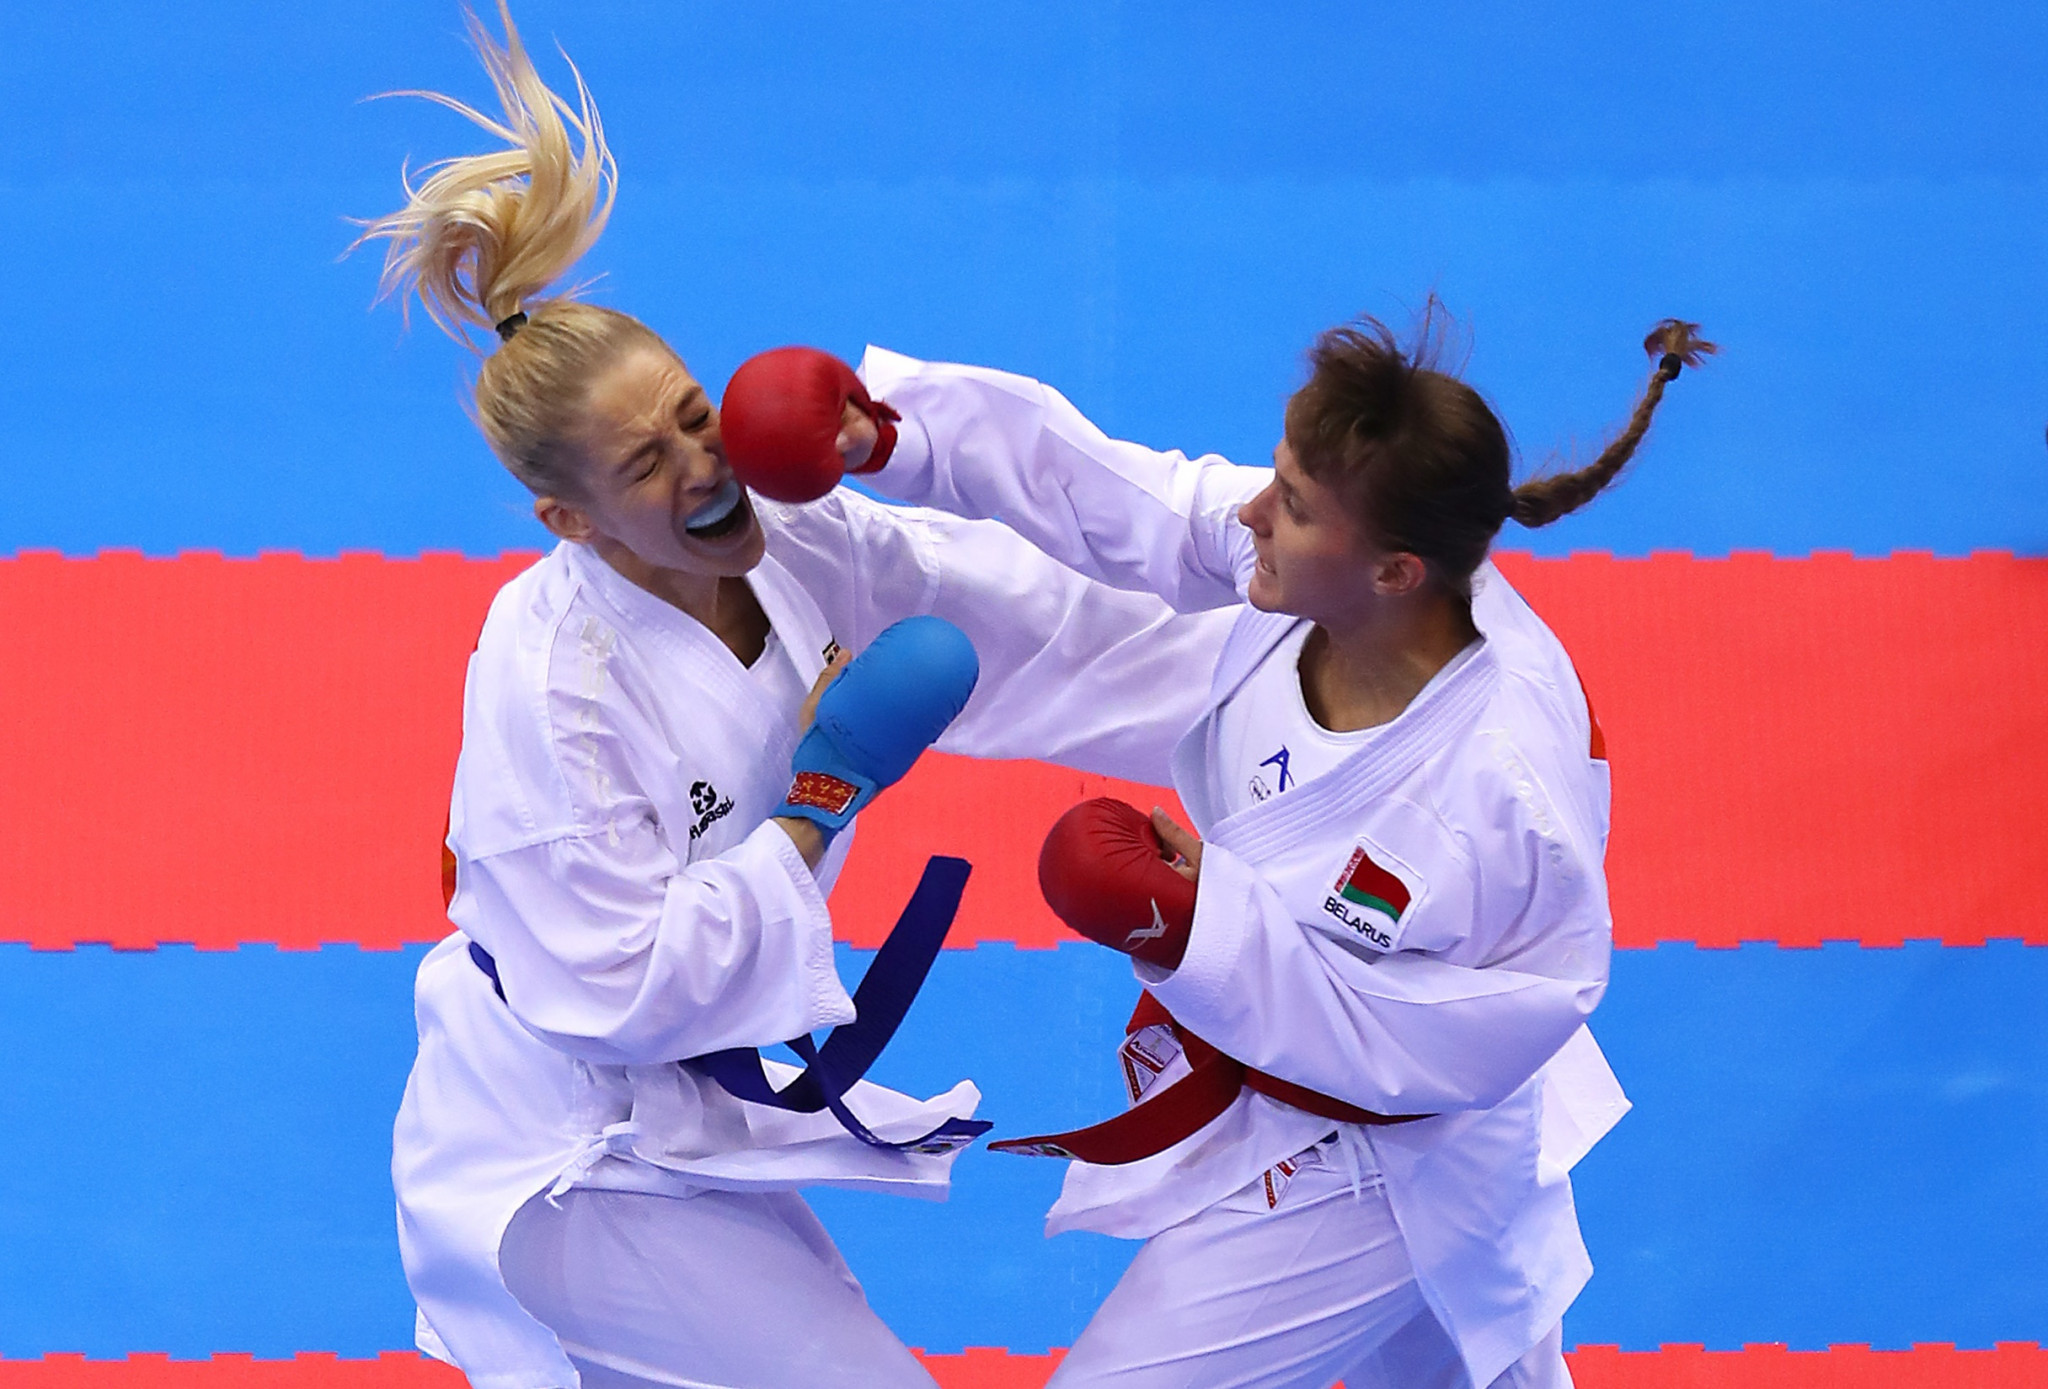 Belarus' Mariya Koulinkovitch, right, achieved bronze at the European Games in 2019 but her nation has been banned from competing in WKF events ©Getty Images 